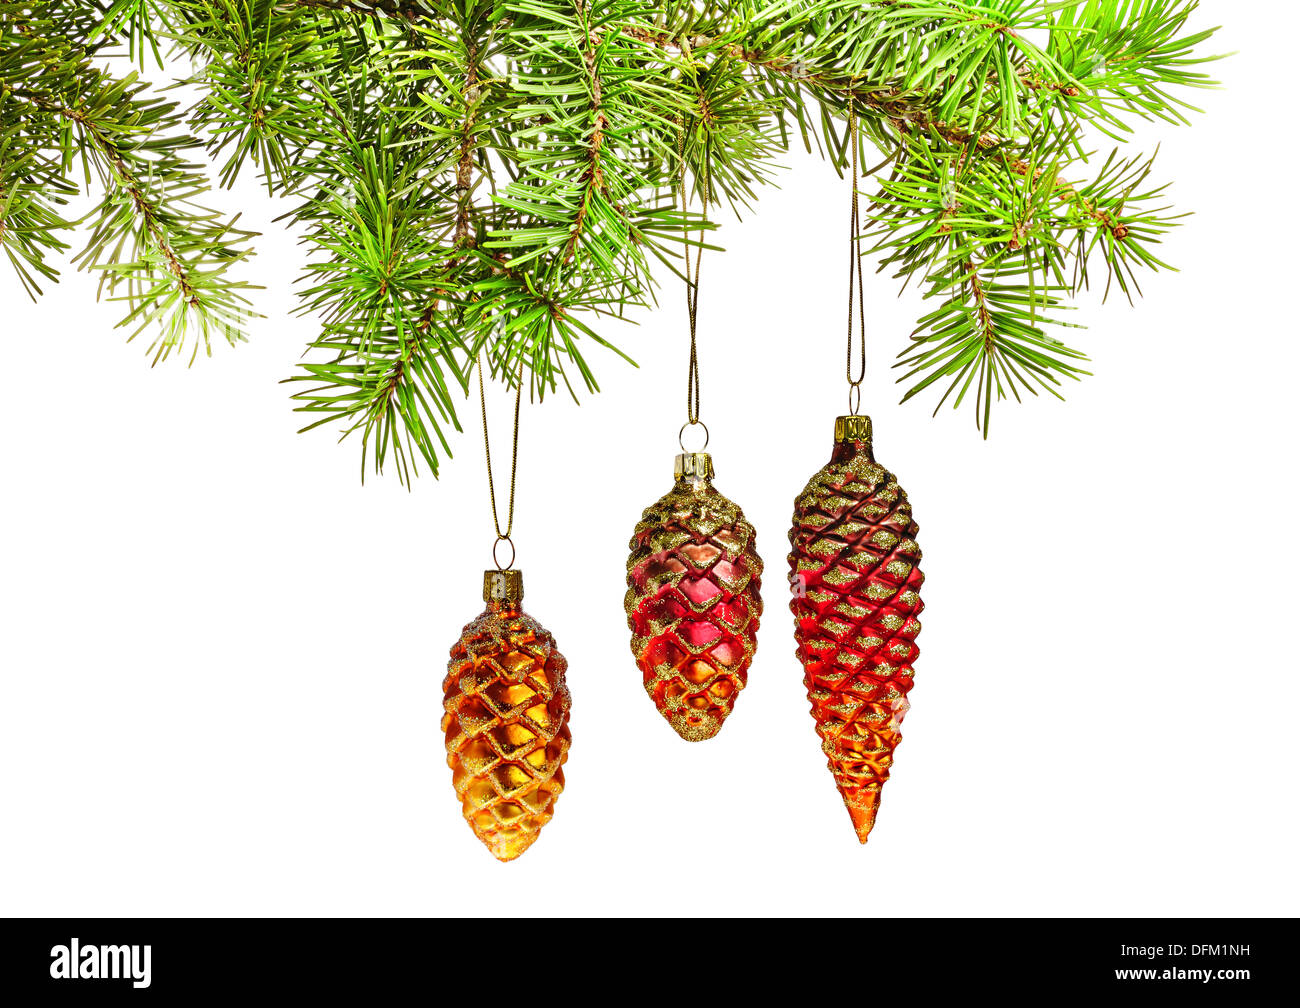 New year toys cones on Christmas tree Stock Photo